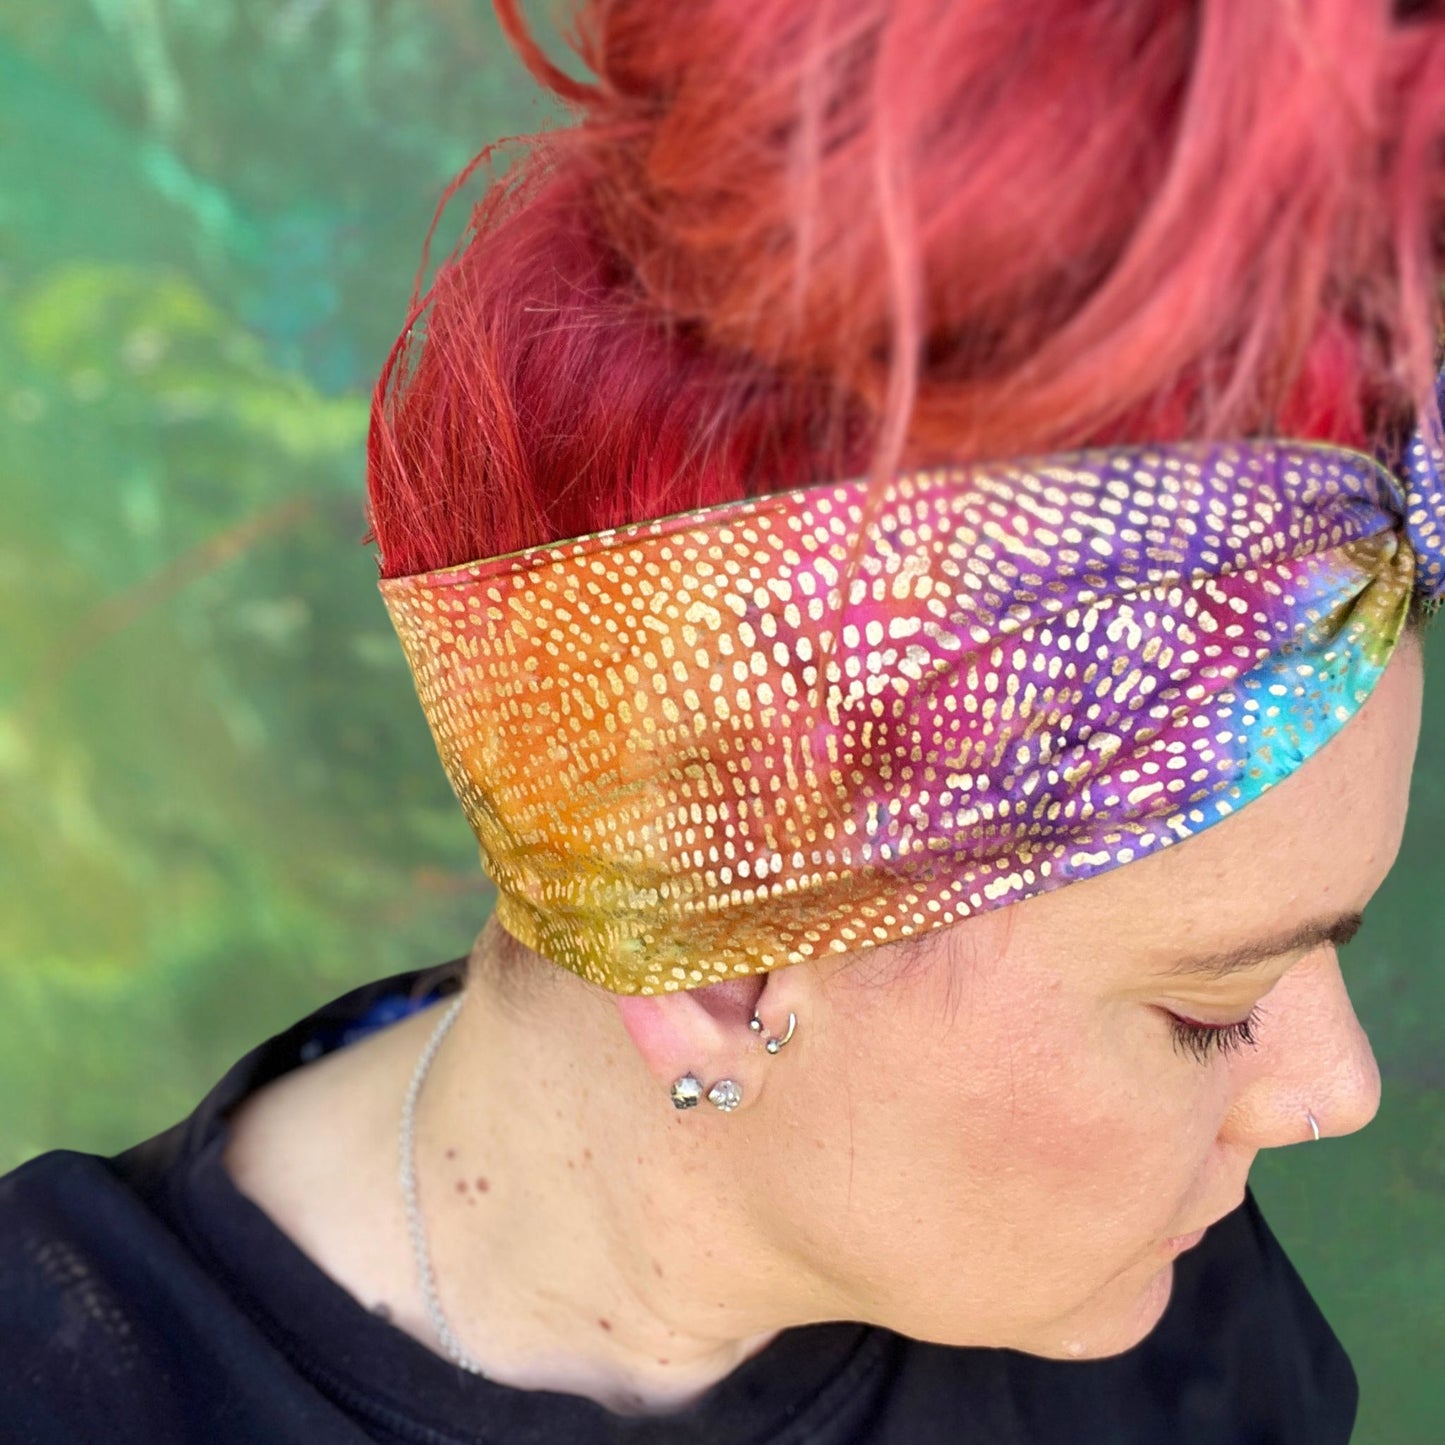 wire headwrap featuring a radiant metallic sheen with a gradient of colors, resembling a rainbow effect. The headwrap is artfully tied in a knot at the side of her head, lending a touch of whimsy to the overall look. 